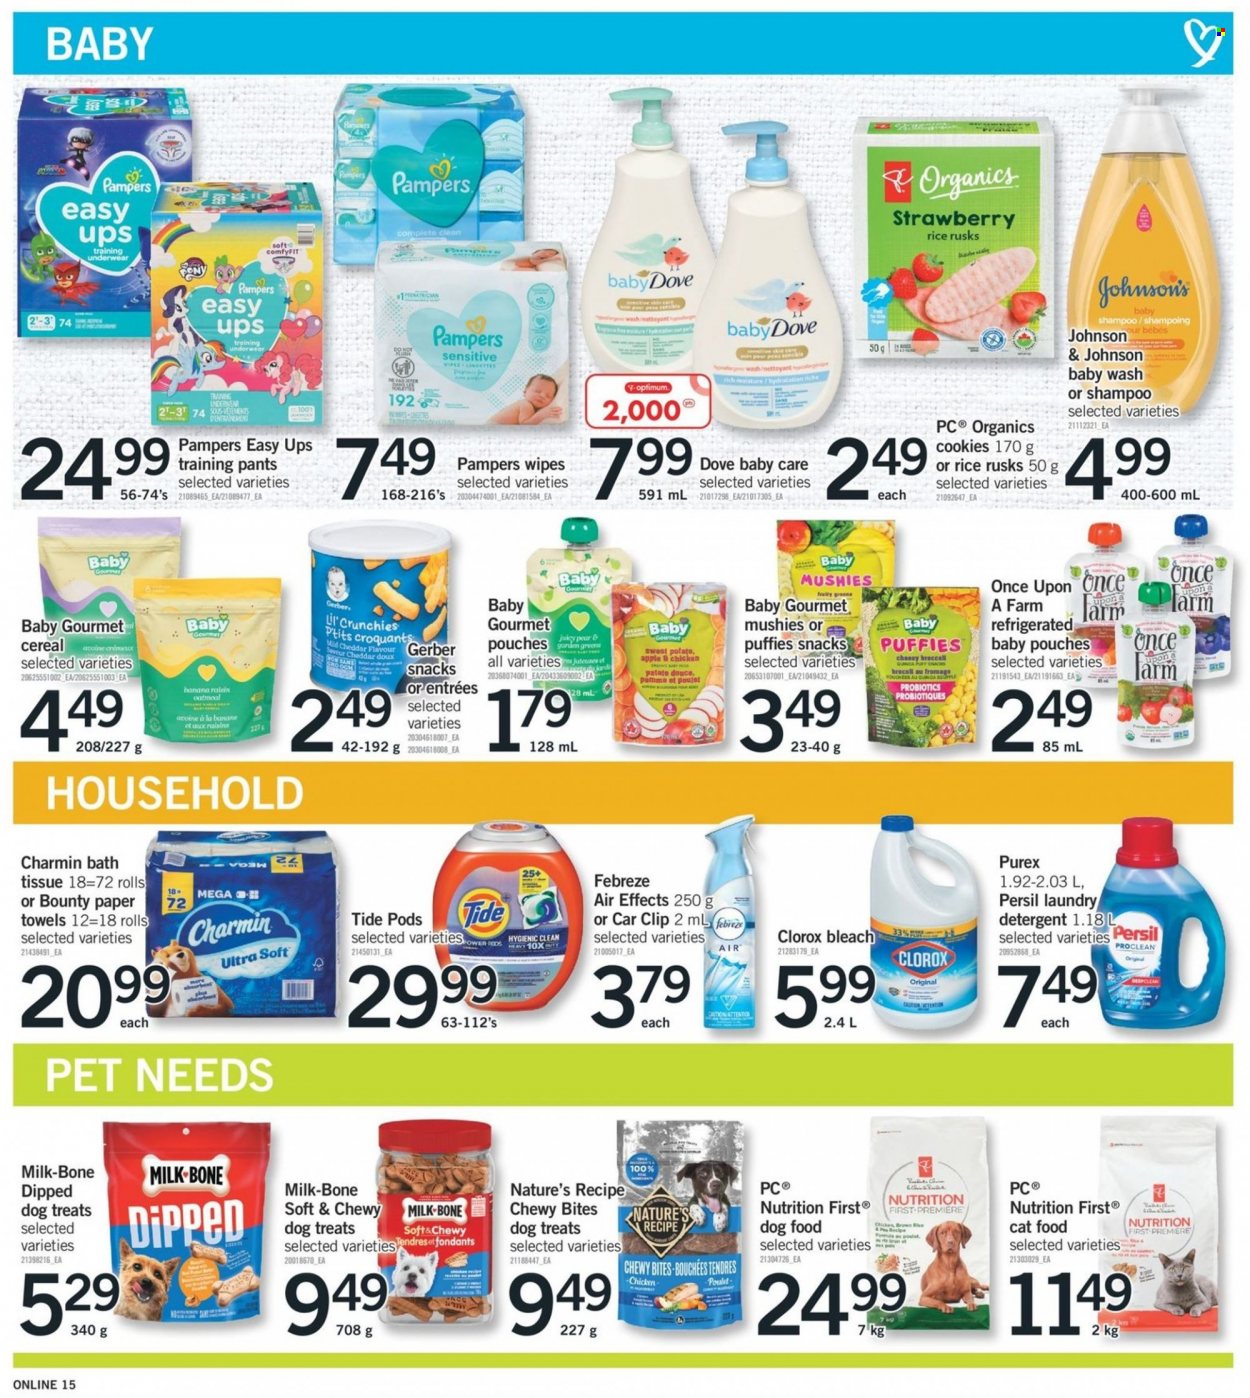 thumbnail - Fortinos Flyer - November 24, 2022 - November 30, 2022 - Sales products - rusks, sweet potato, cheddar, cheese, milk, cookies, Dove, snack, Bounty, Gerber, Lil' Crunchies, oatmeal, pickles, cereals, brown rice, dried fruit, wipes, pants, Johnson's, baby pants, bath tissue, kitchen towels, paper towels, Charmin, Febreze, bleach, Clorox, Tide, Persil, laundry detergent, Purex, animal food, PREMIERE, cat food, dog food, Optimum, underwear, probiotics, detergent, quinoa, raisins, shampoo, Pampers. Page 15.